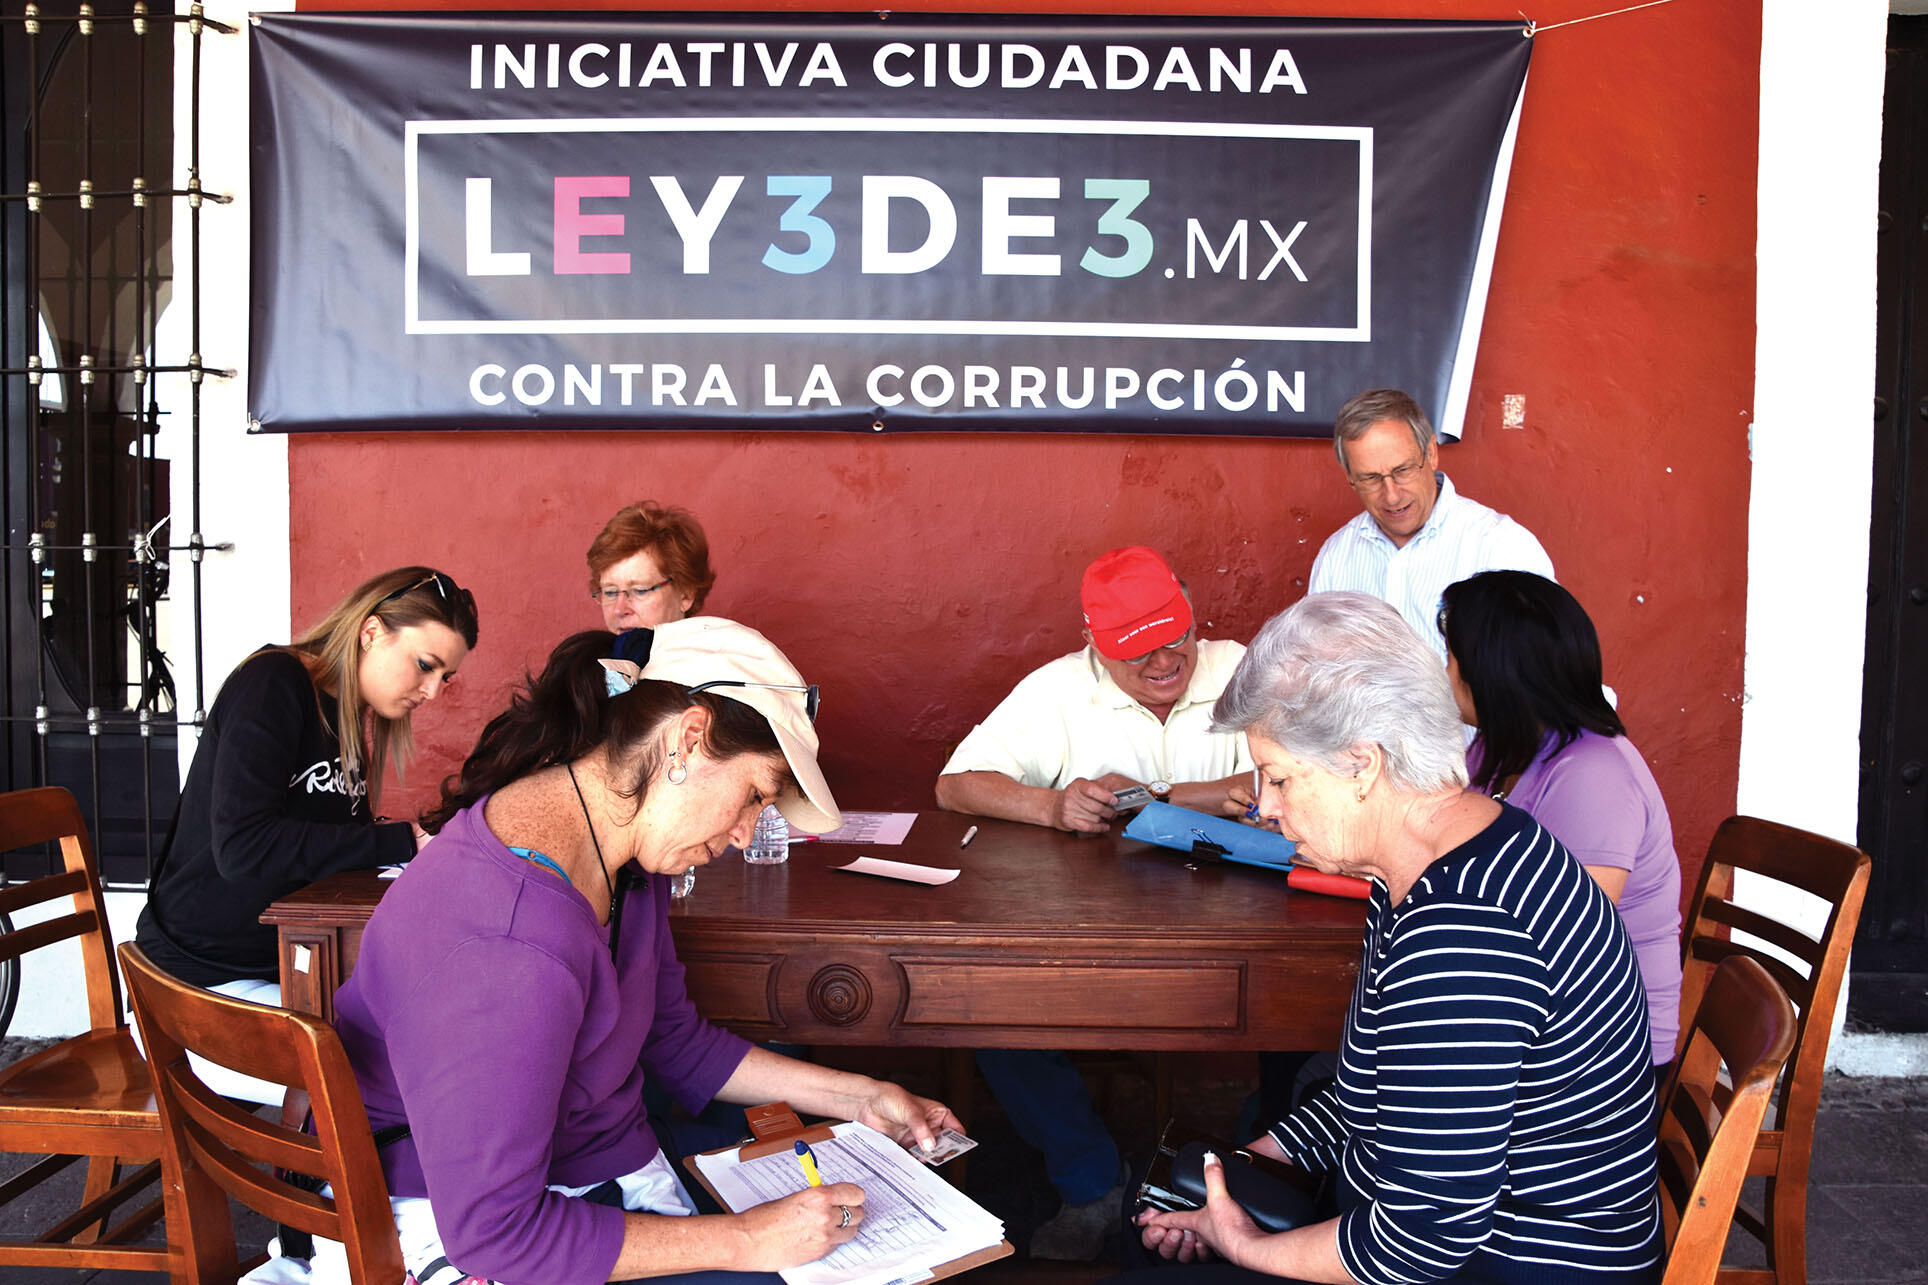 Mexicans line up at a table to sign a petition supporting the Ley 3de3 anti-corruption measure in Cholula. (Photo courtesy of Gobierno Cholula.)